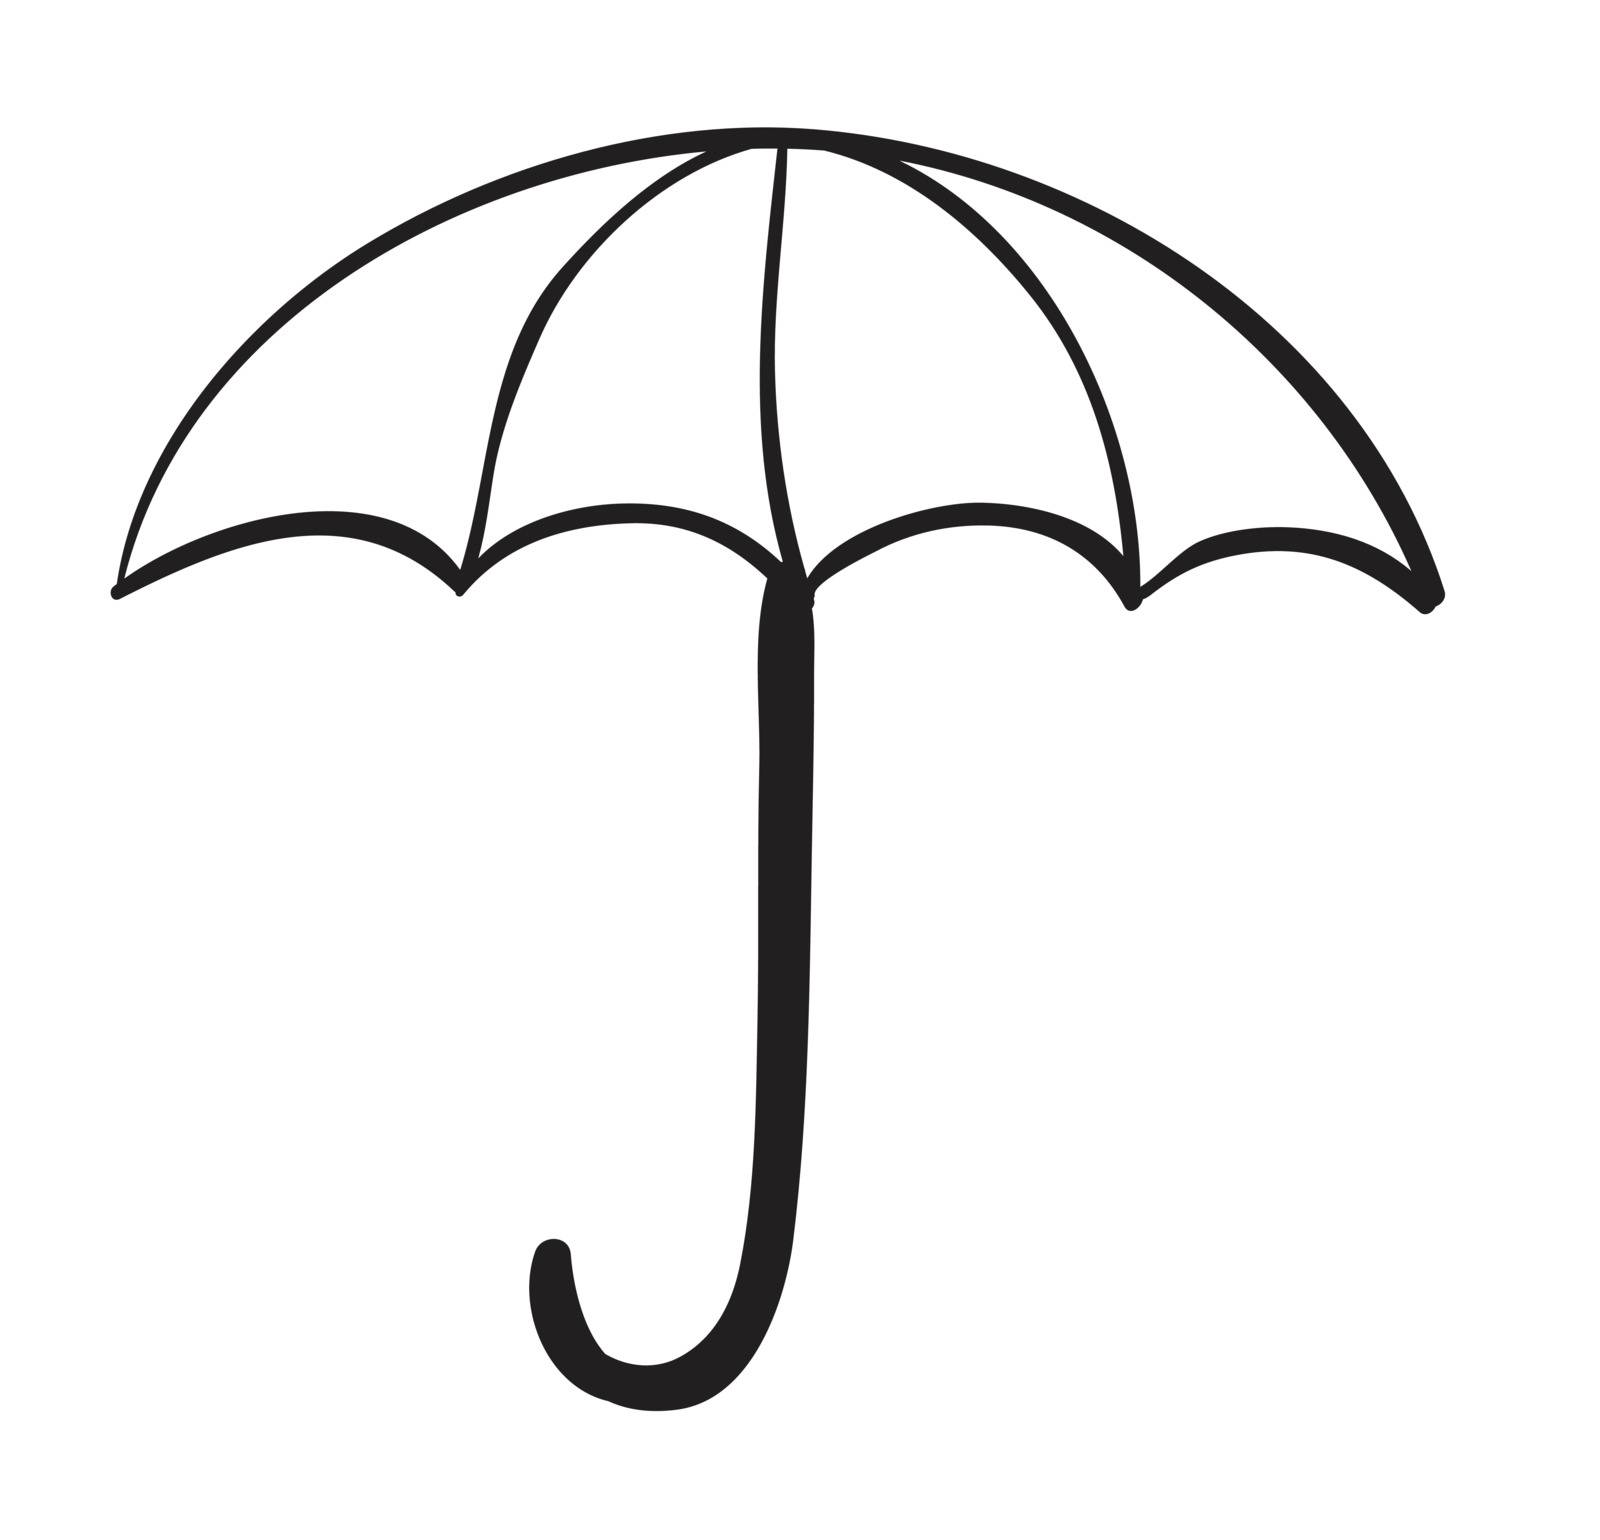 illustration of an umbrella on a white background